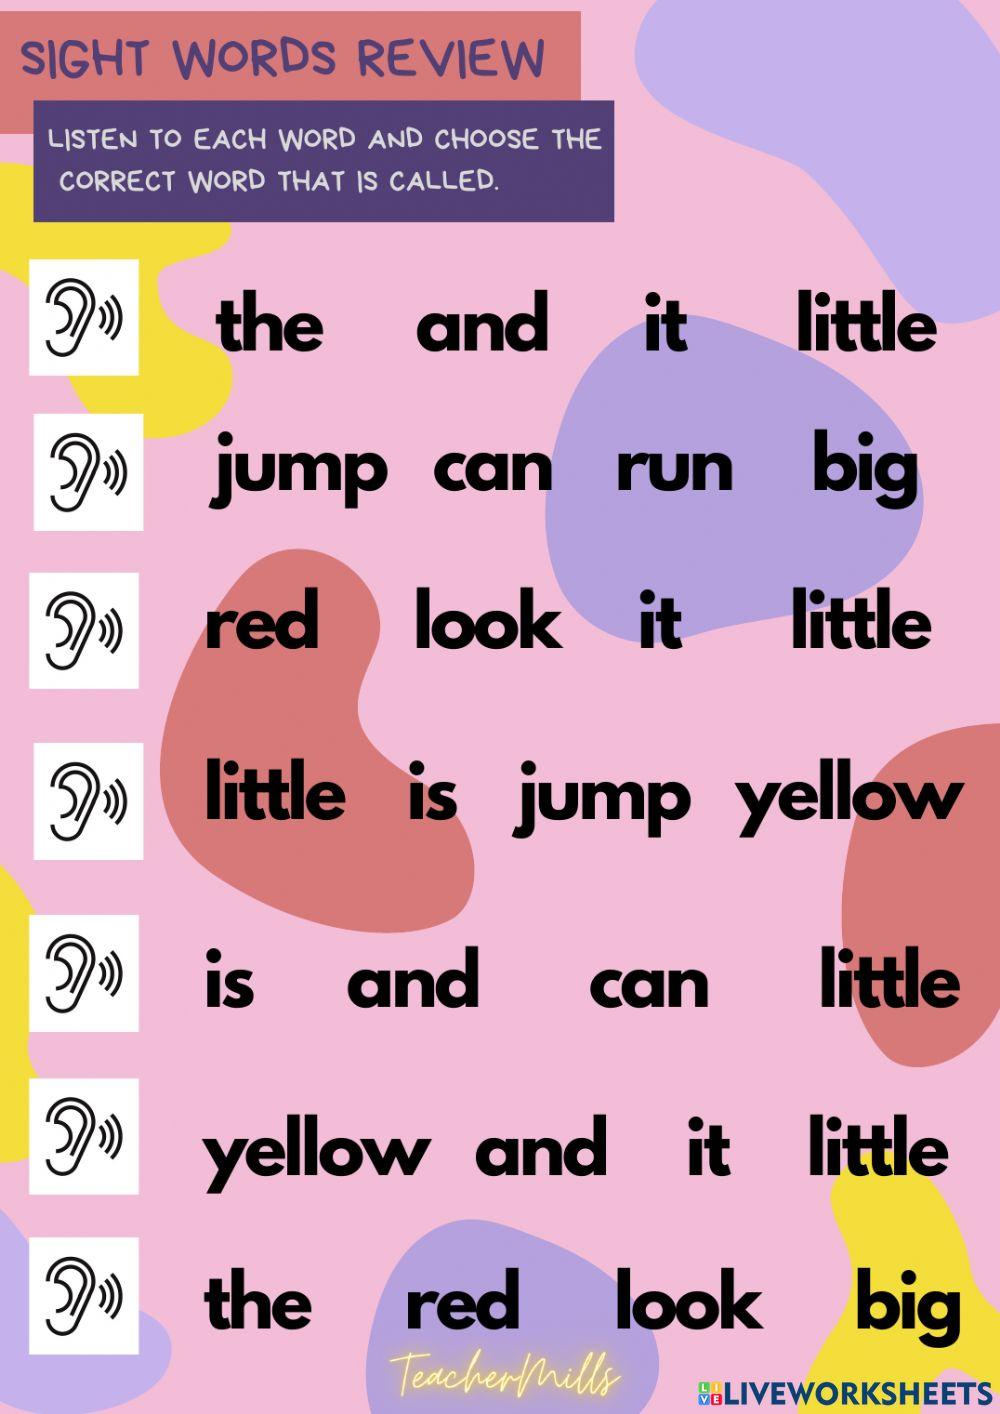 Sight words - Review